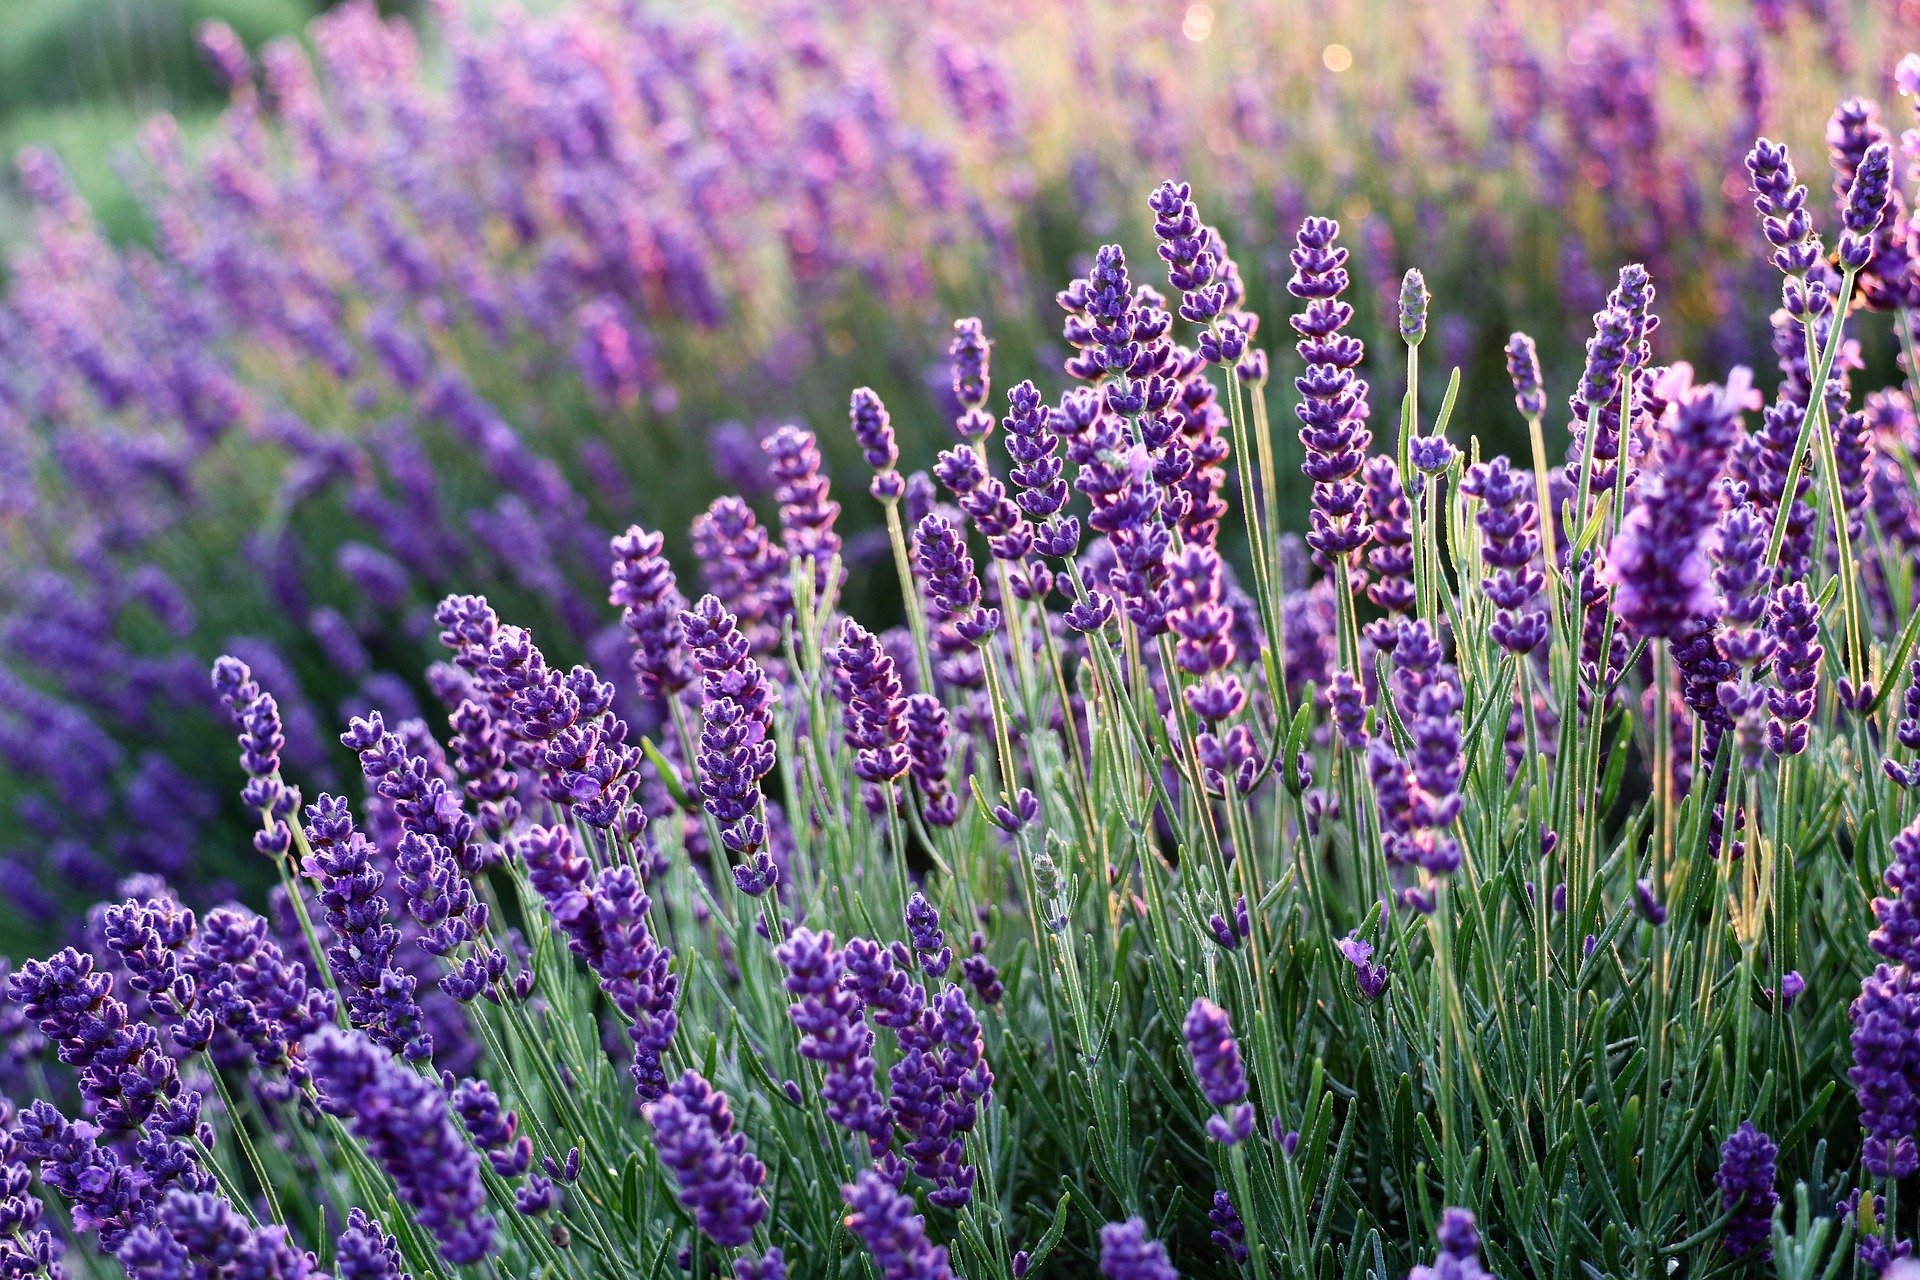 A field with lavender plants